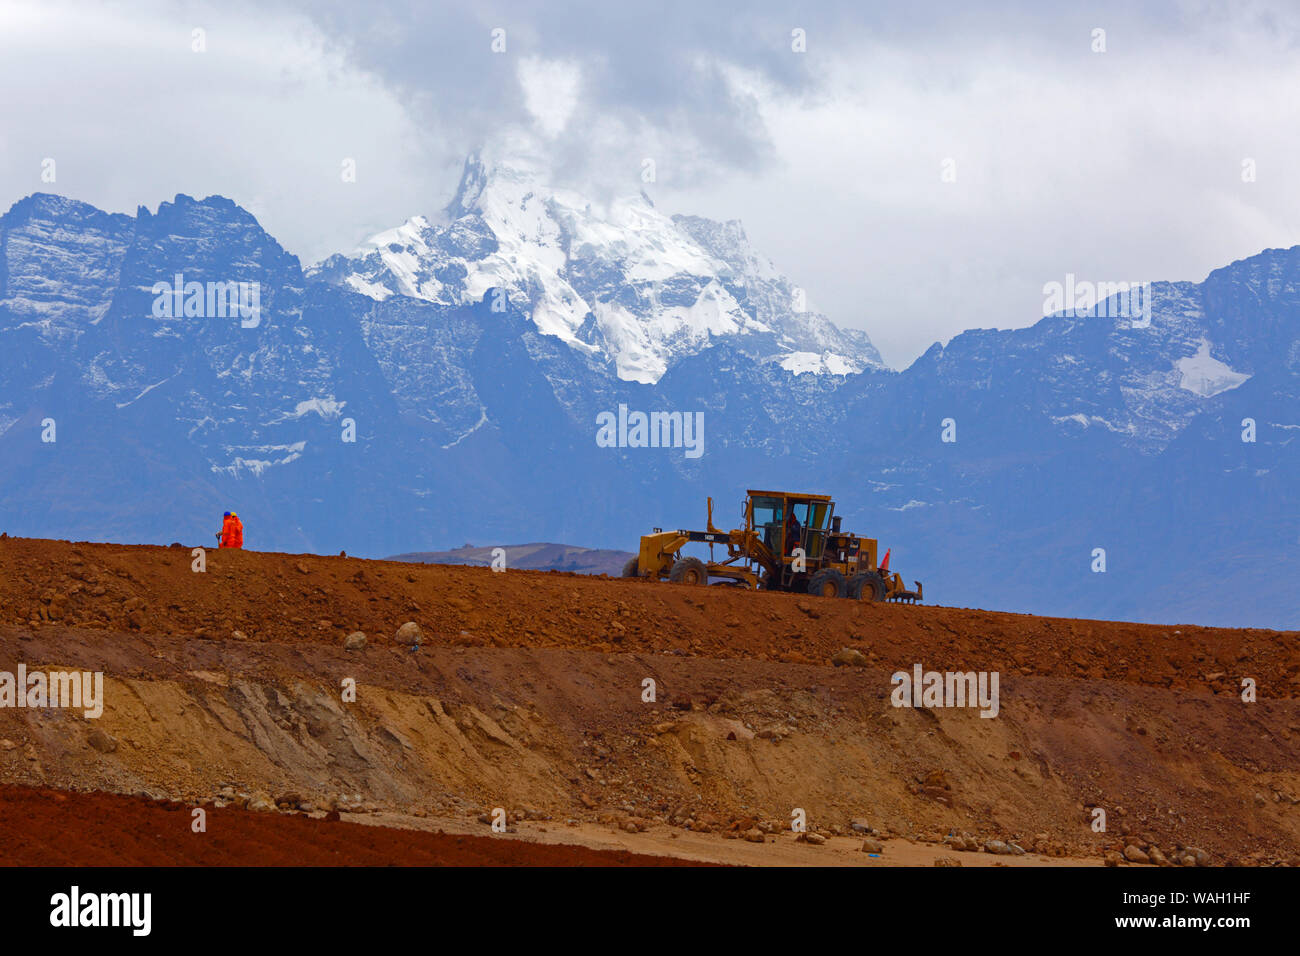 Road grader working moving earth, the start of construction at the site of a new international airport at Chinchero for Cusco and Machu Picchu. In the background is Mt Sawasiray, one of the peaks of the Cordillera Urubamba mountain range. Cusco Region, Peru Stock Photo